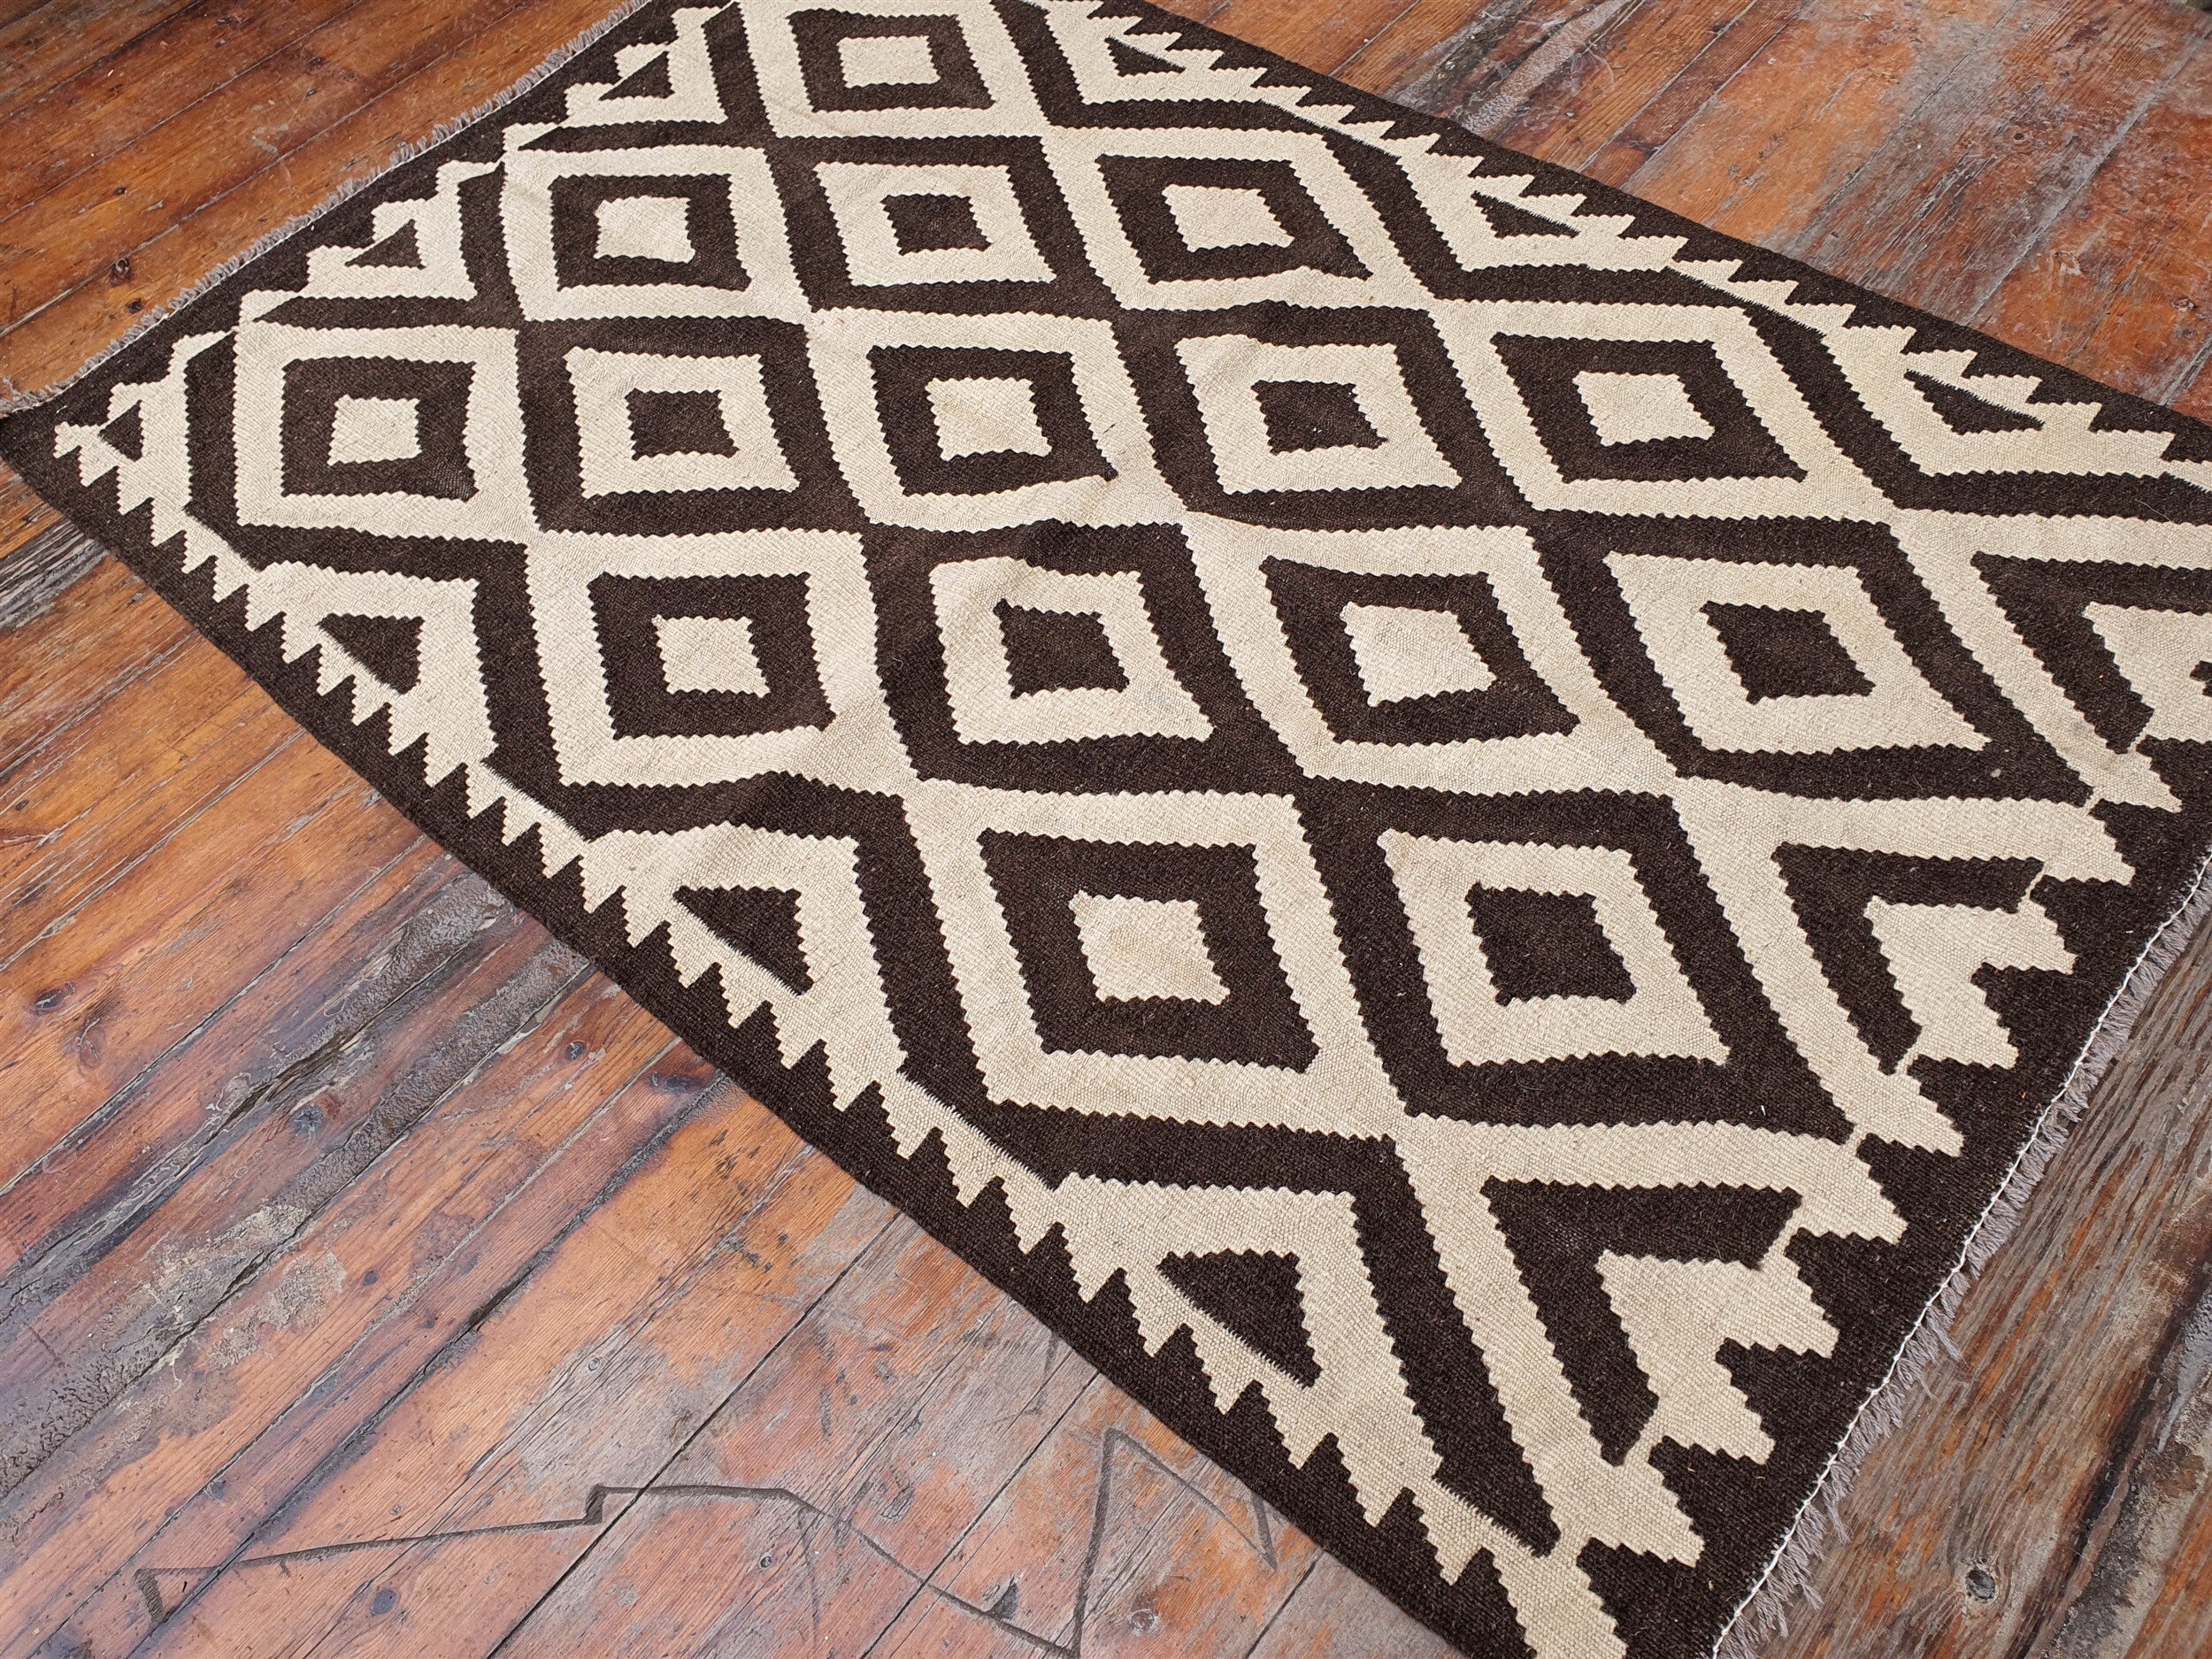 Afghan Kilim Rug 4 ft 9 in x 3 ft 2 in Brown and Off-White Moroccan Style Rug